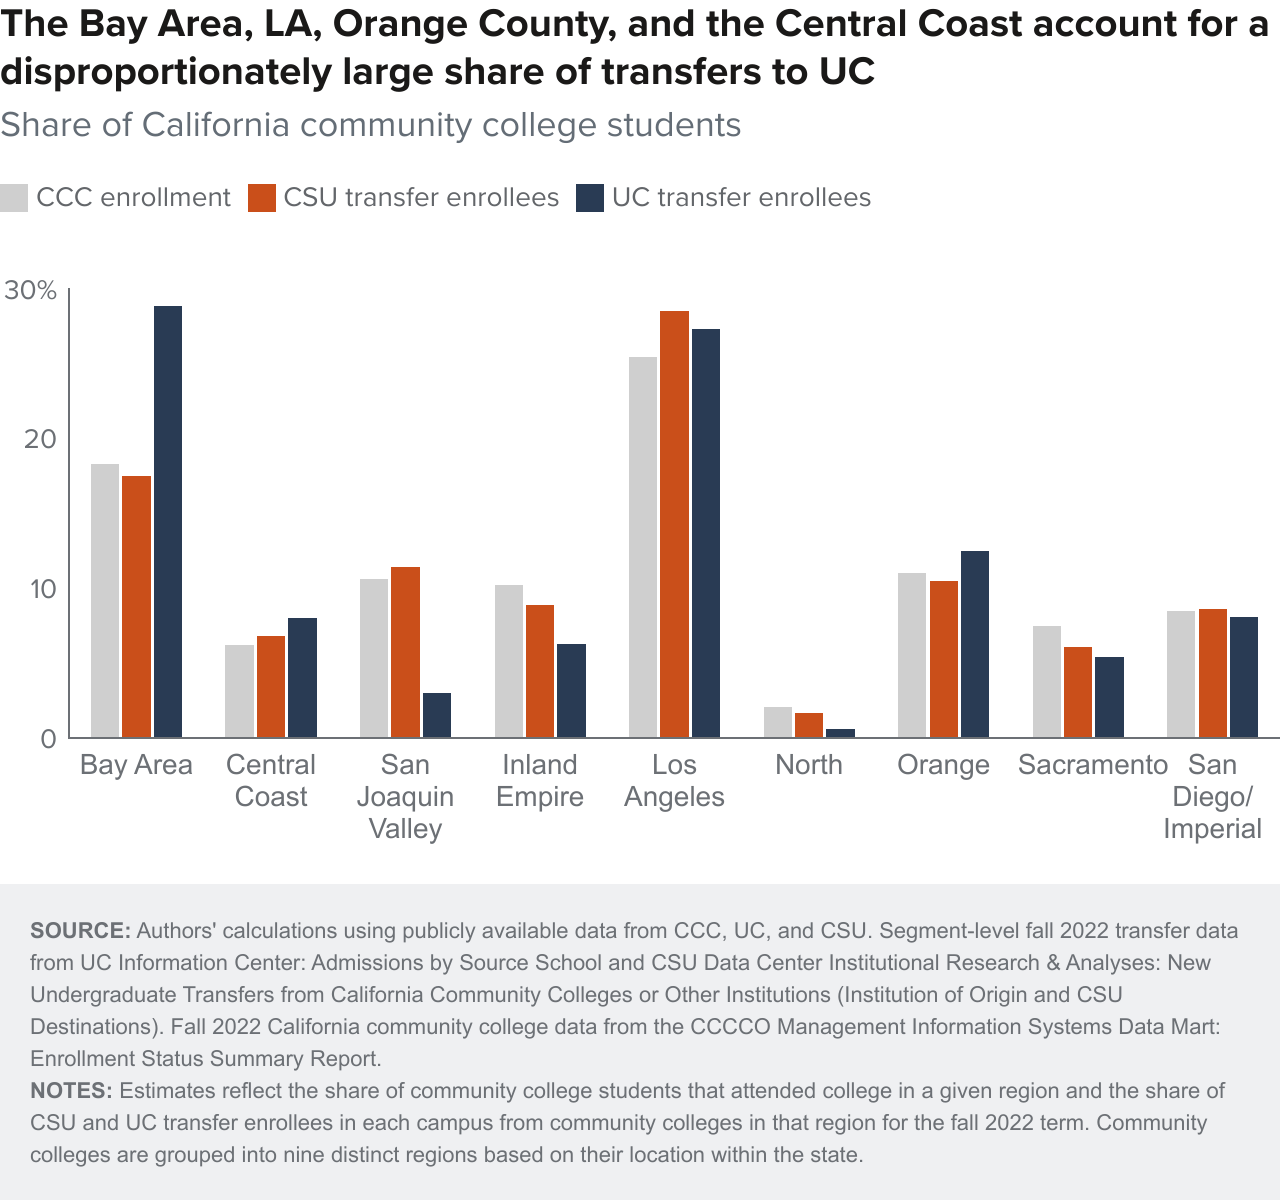 figure 7 - The Bay Area, LA, Orange County, and the Central Coast account for a disproportionately large share of transfers to UC